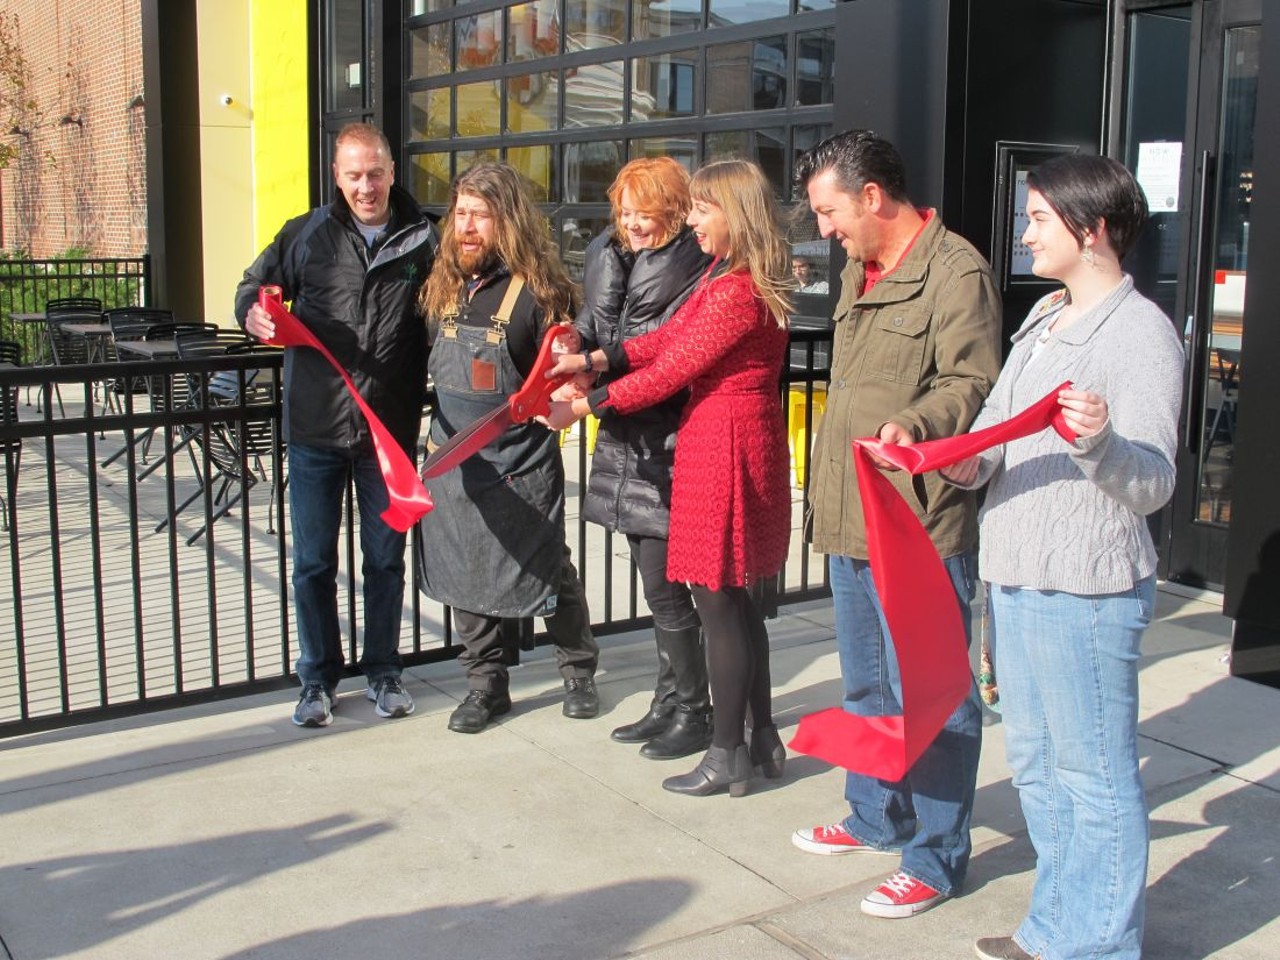 Photos from the Ribbon Cutting Ceremony at the New Noodlecat in Westlake